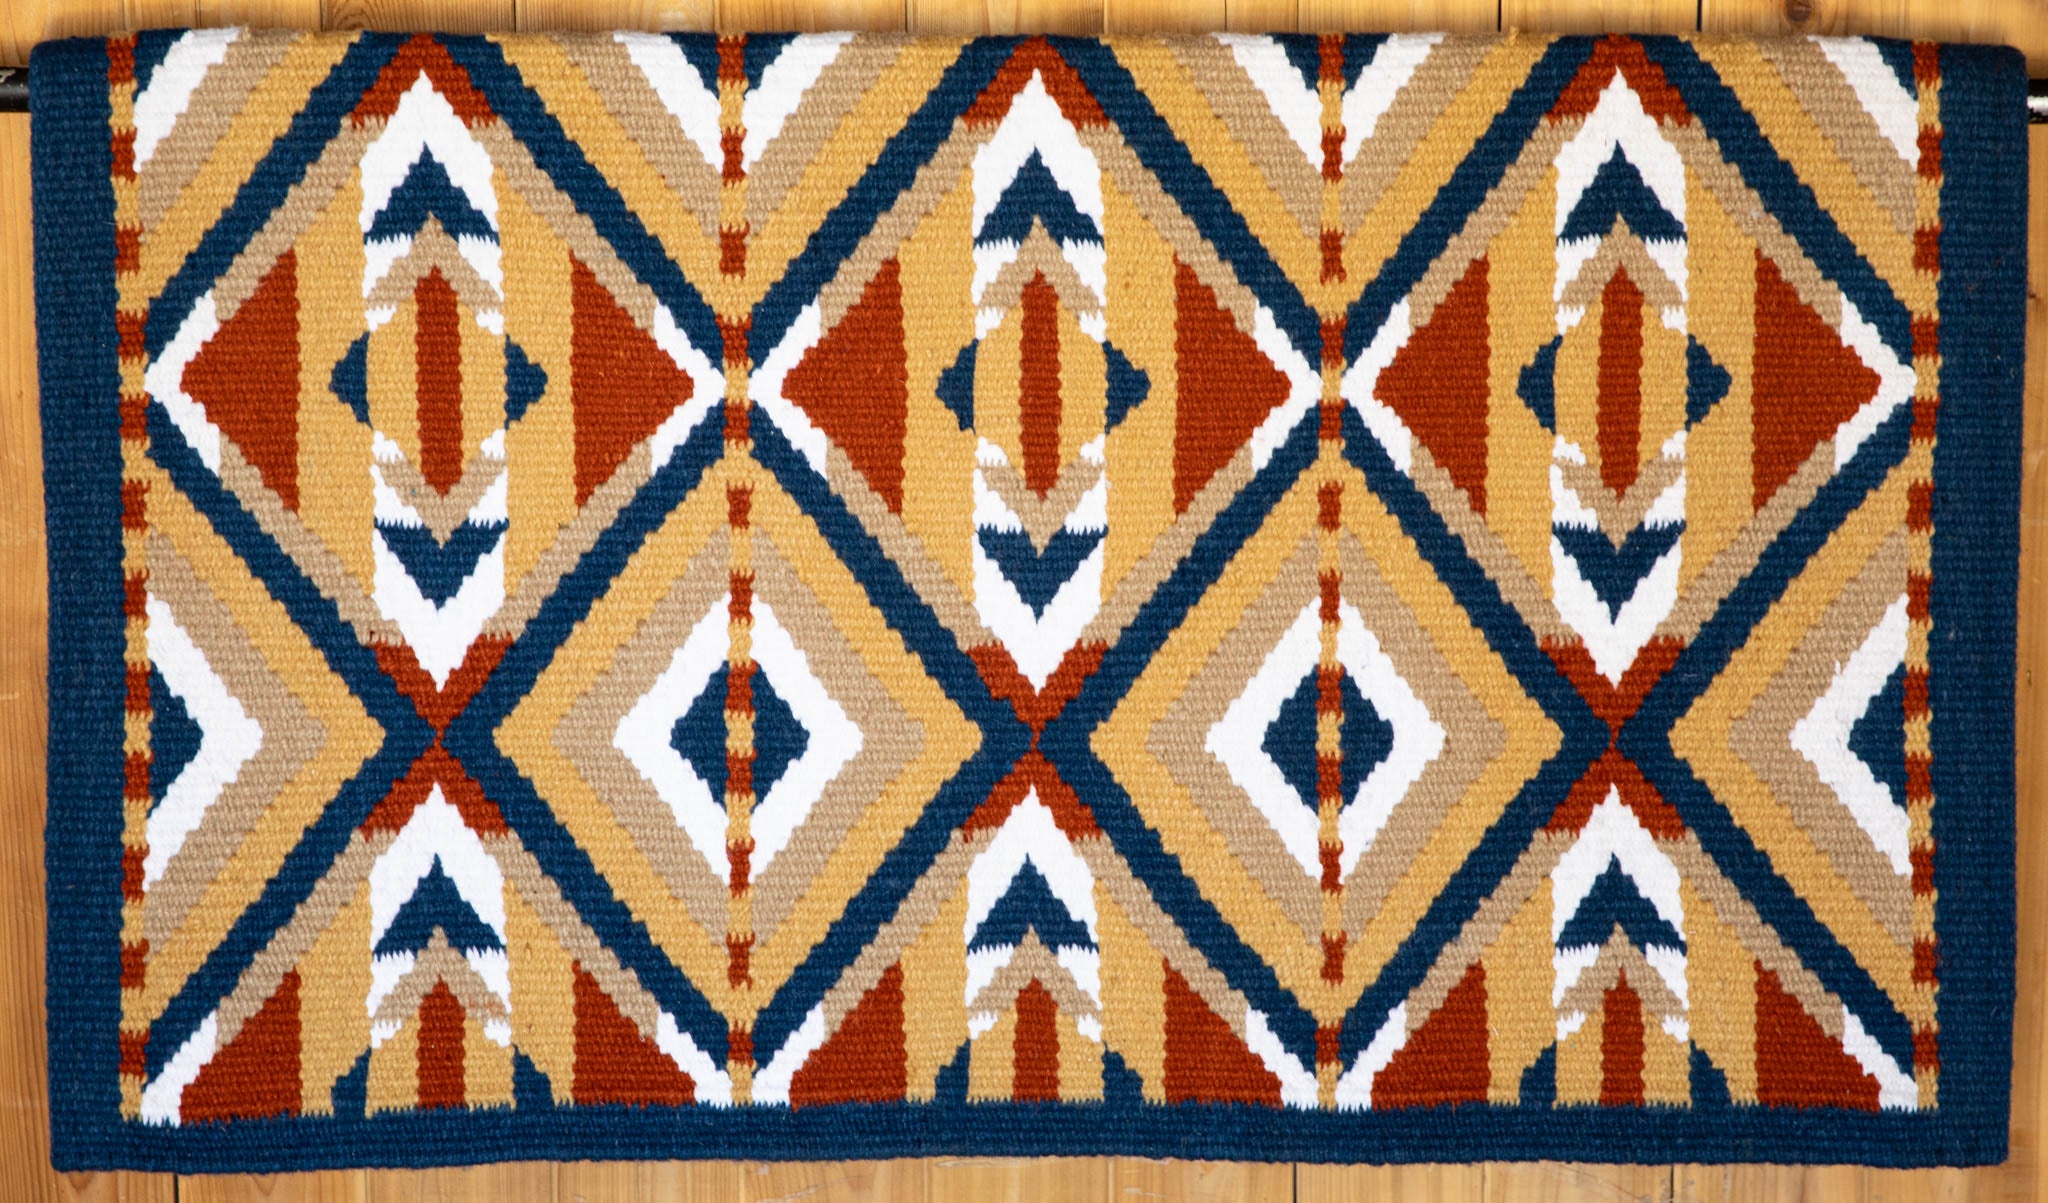 Tan, Rust, Navy Blue w/ White Accents Flat Show Blanket